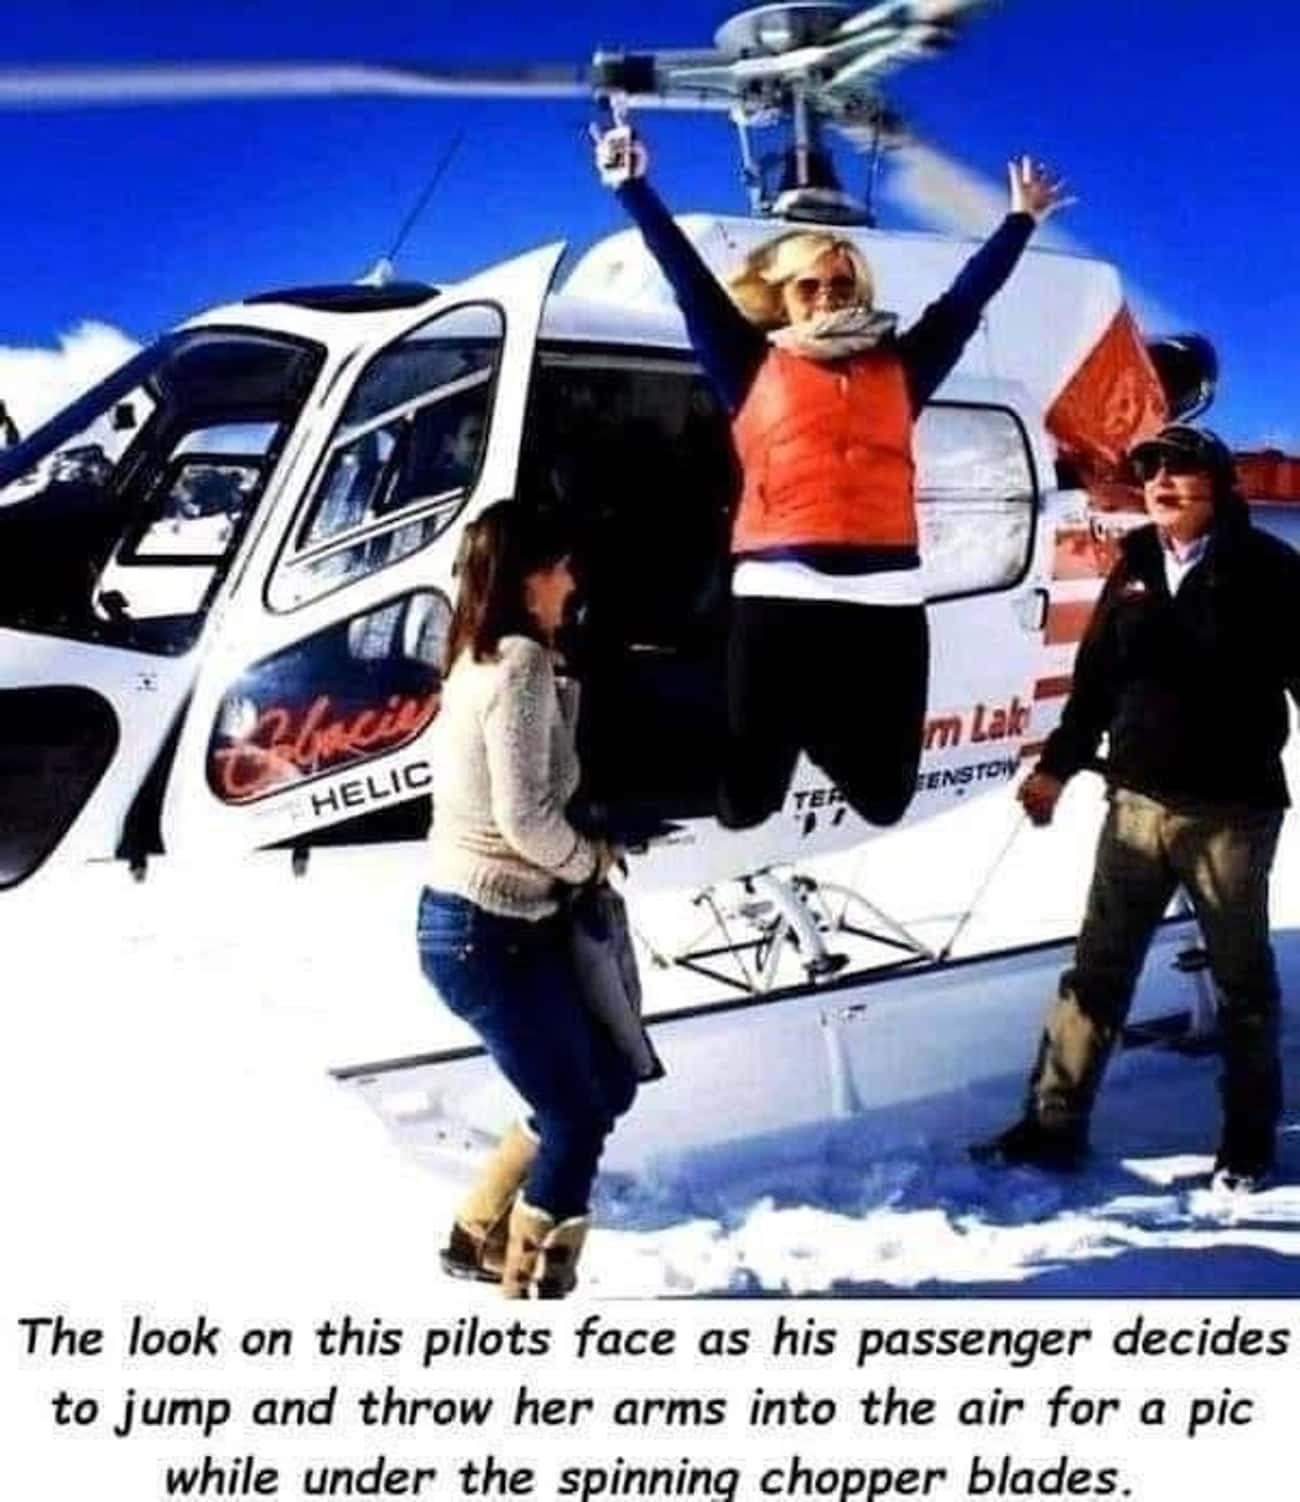 The Pilot Does Not Approve Of That Photo Opportunity